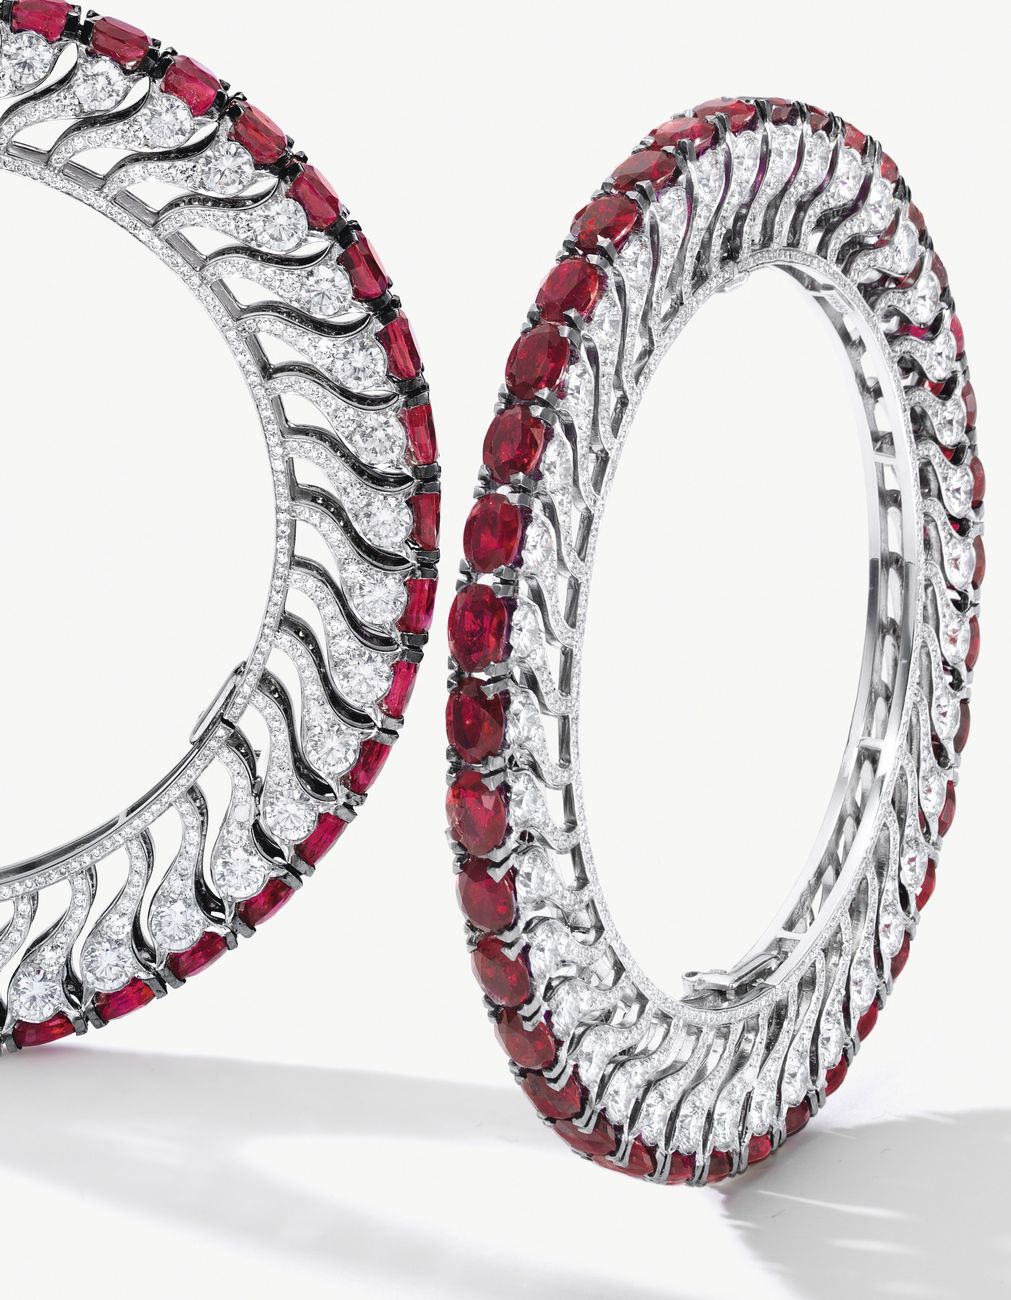 Lot 1707 - Another View of the Unique Pair of Ruby and Diamond Bangles, BHAGAT